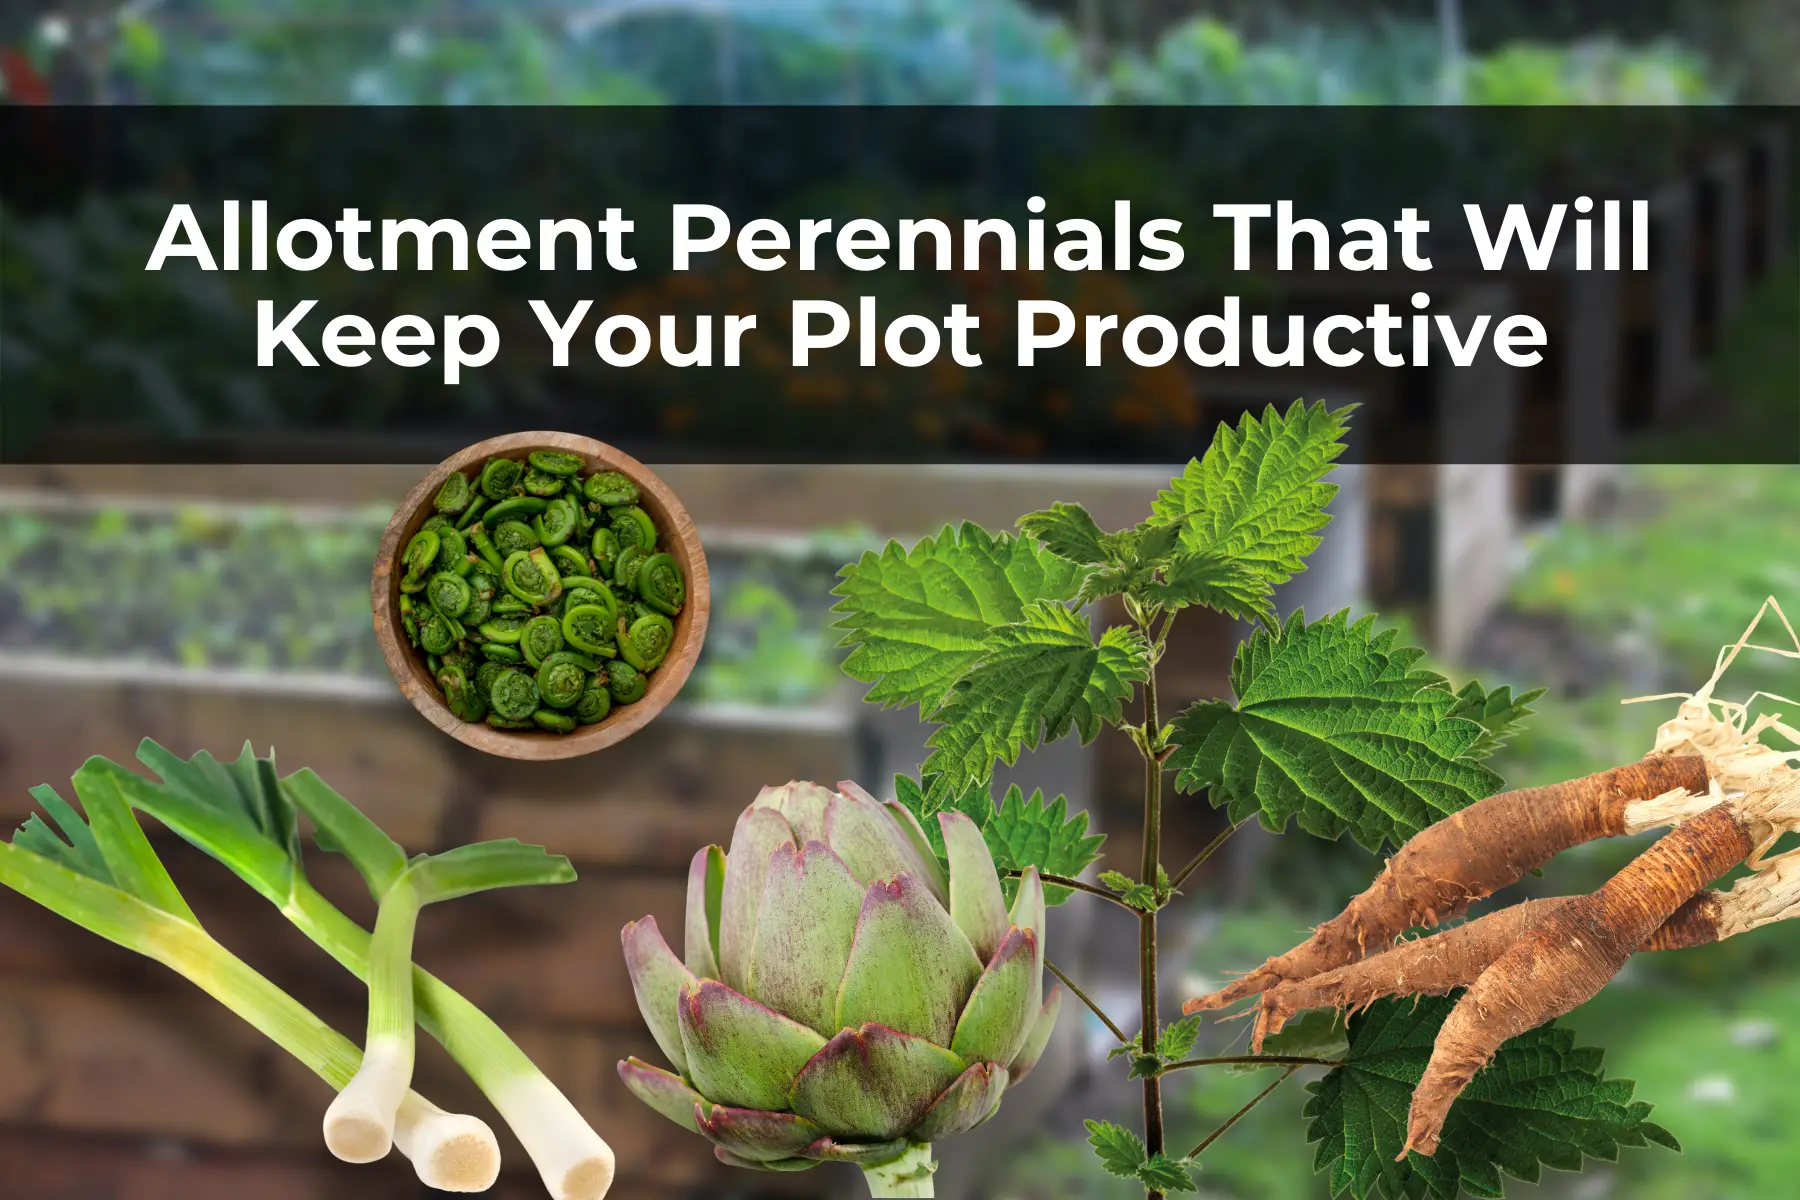 Allotment Perennials That Will Keep Your Plot Productive